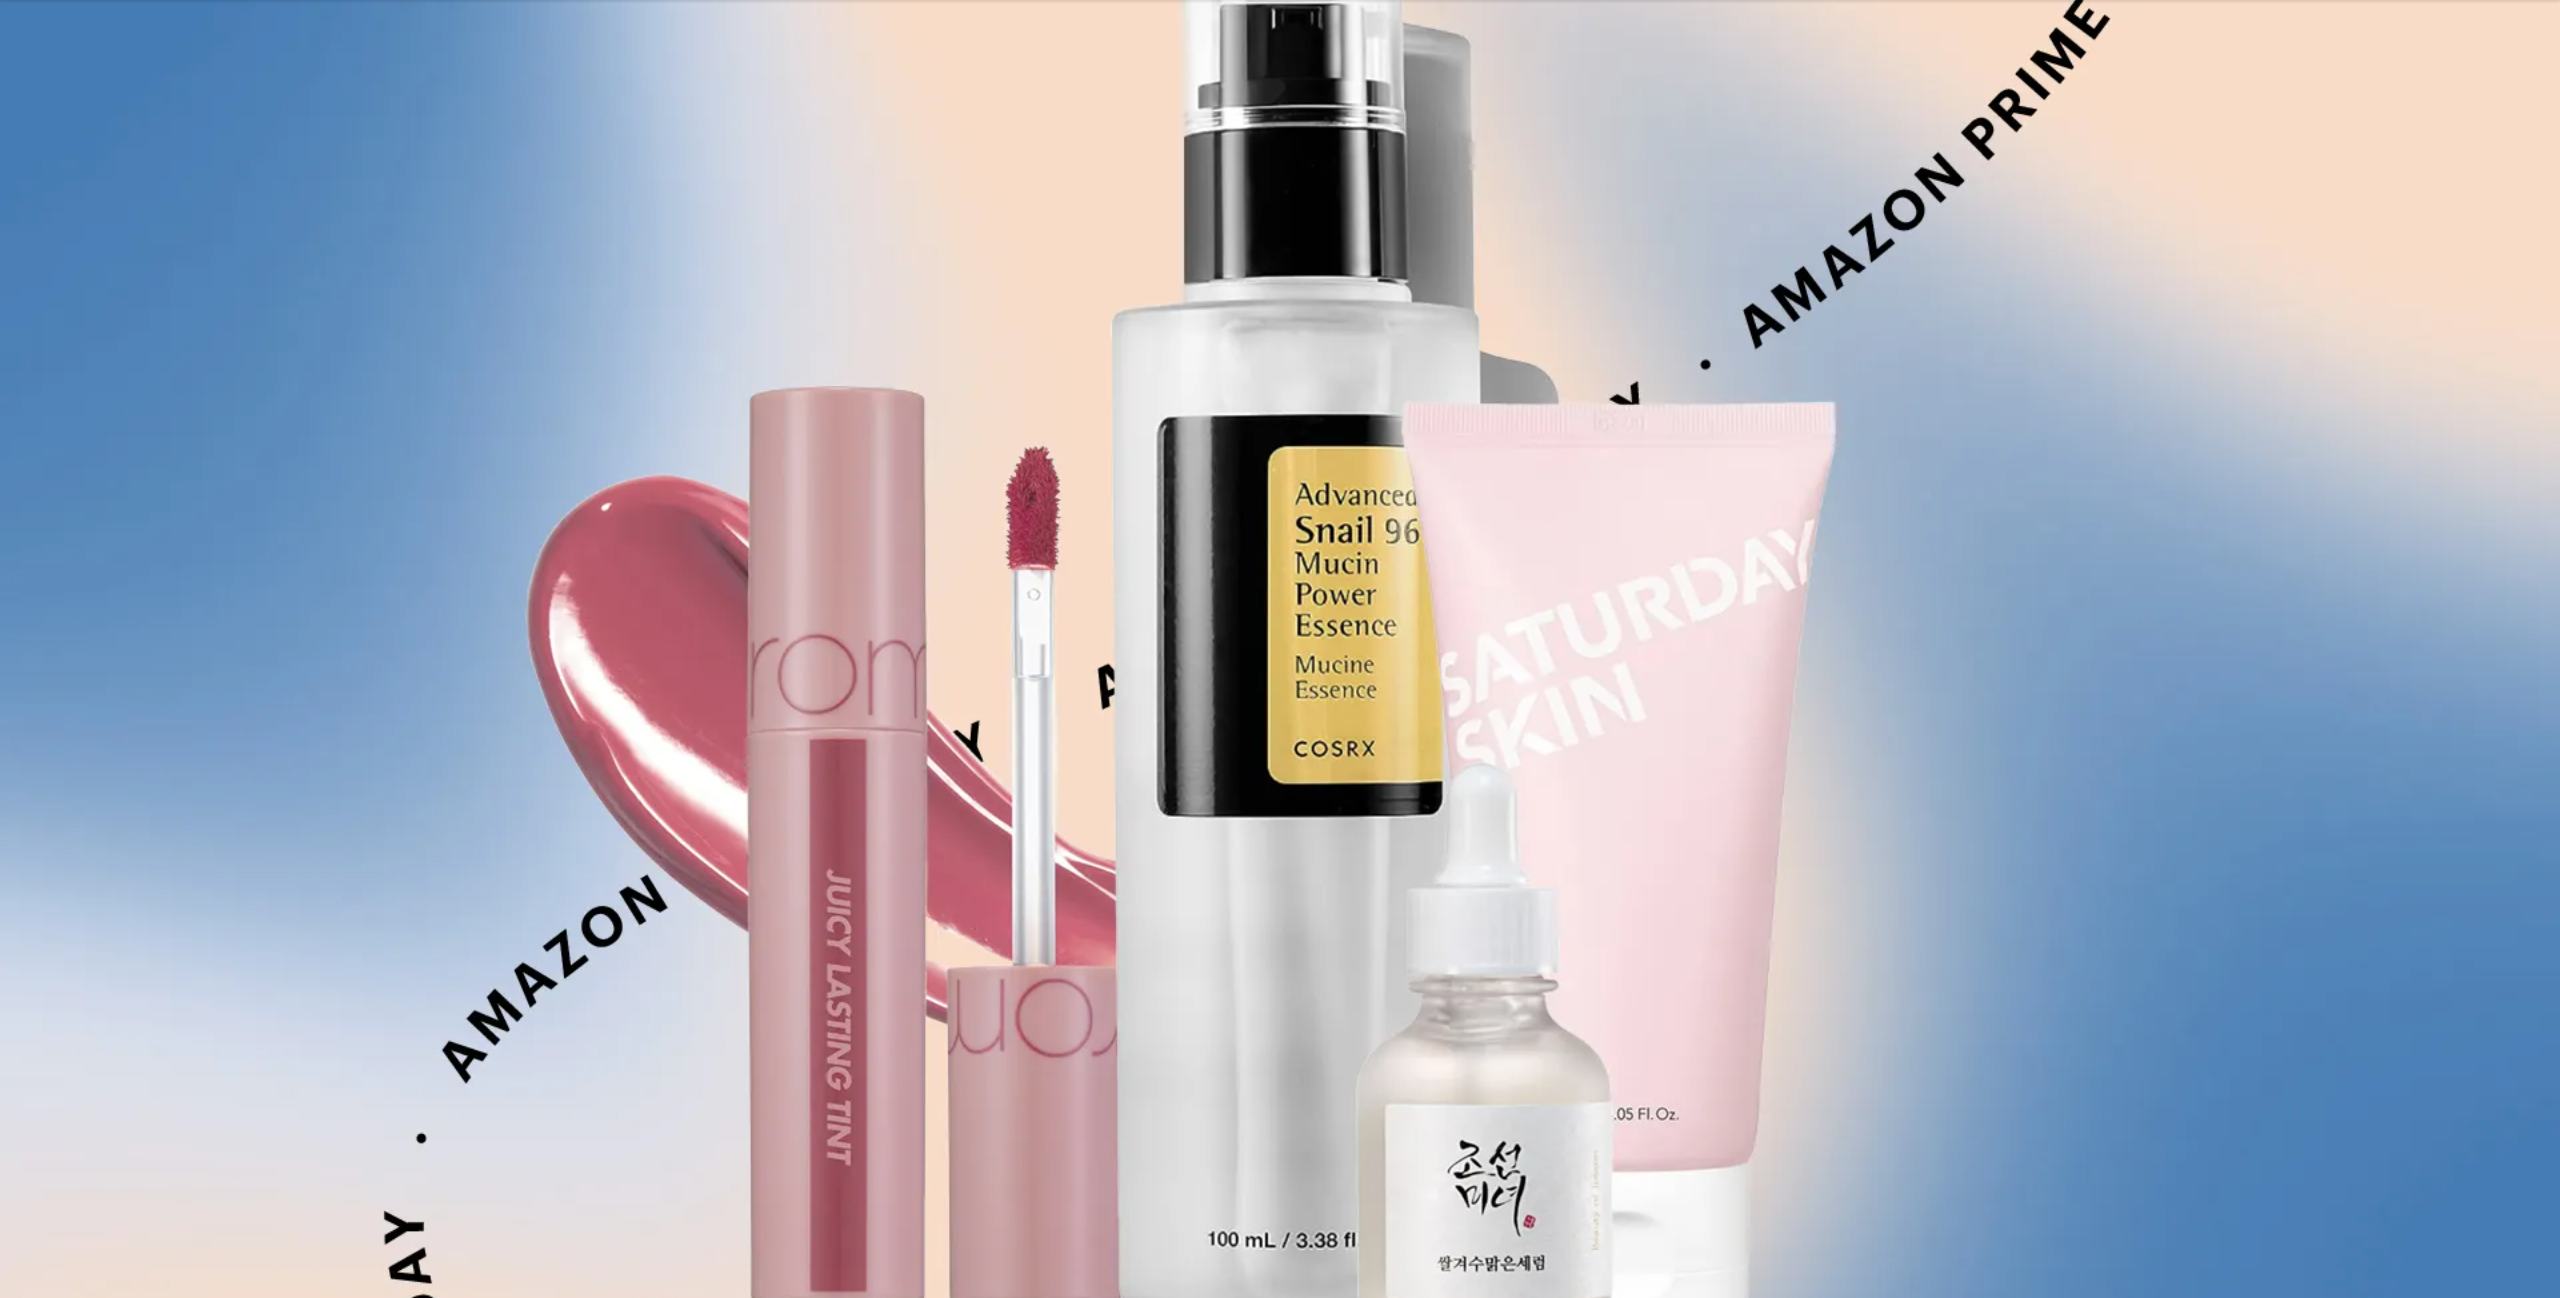 COSRX, Glow Recipe, and Saturday Skin are the South Korean skincare and makeup labels currently popular in Europe and the US. Photo: Glamour UK 